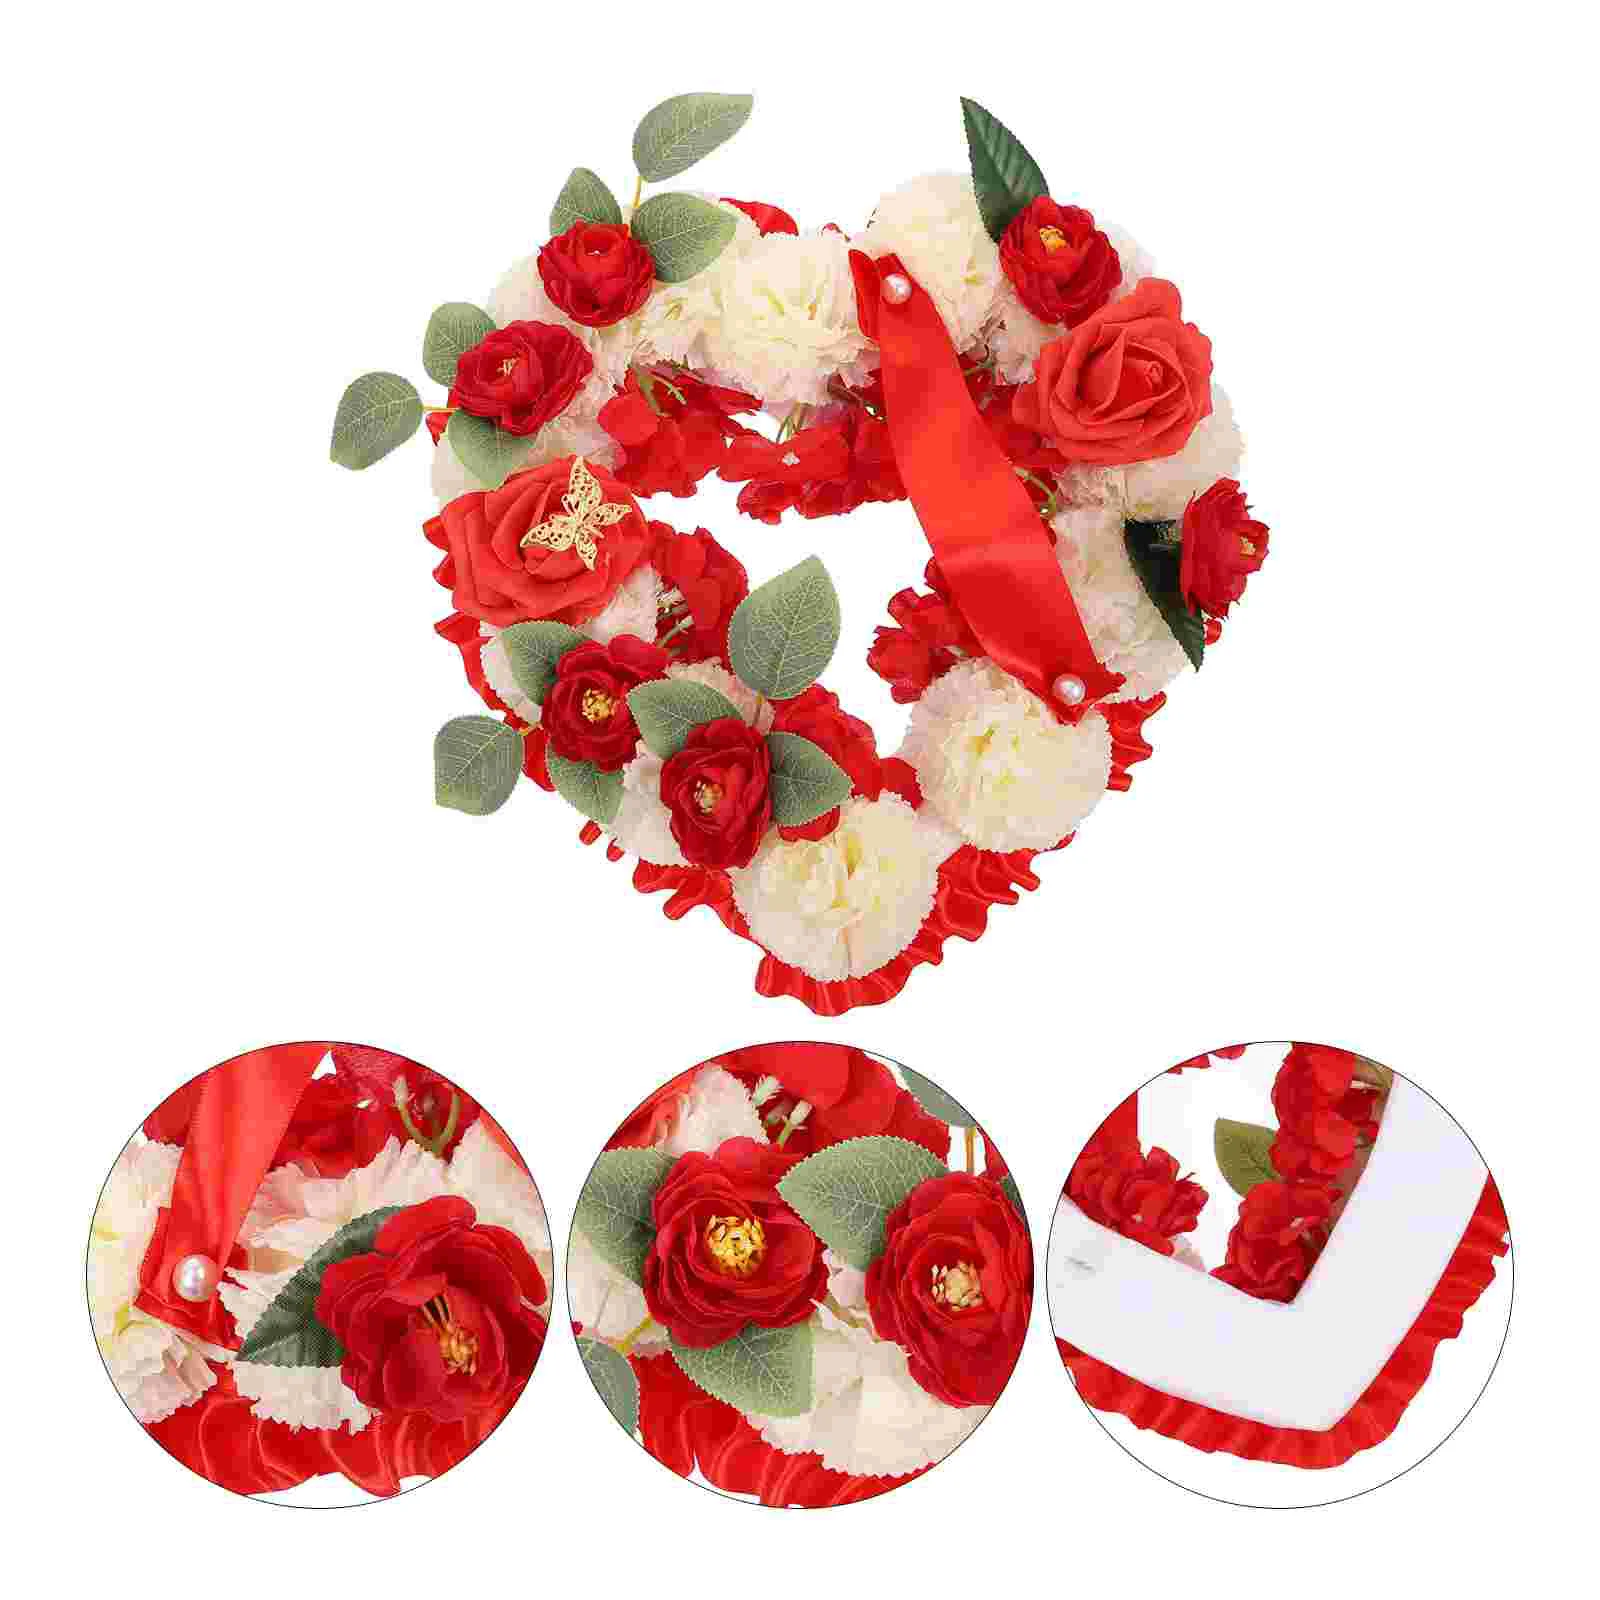 

Heart Memorial Wreath Fake Mourning Chic Prop Cemetery Flower Adorn Artificial Garland Gift Grave decorations outdoor